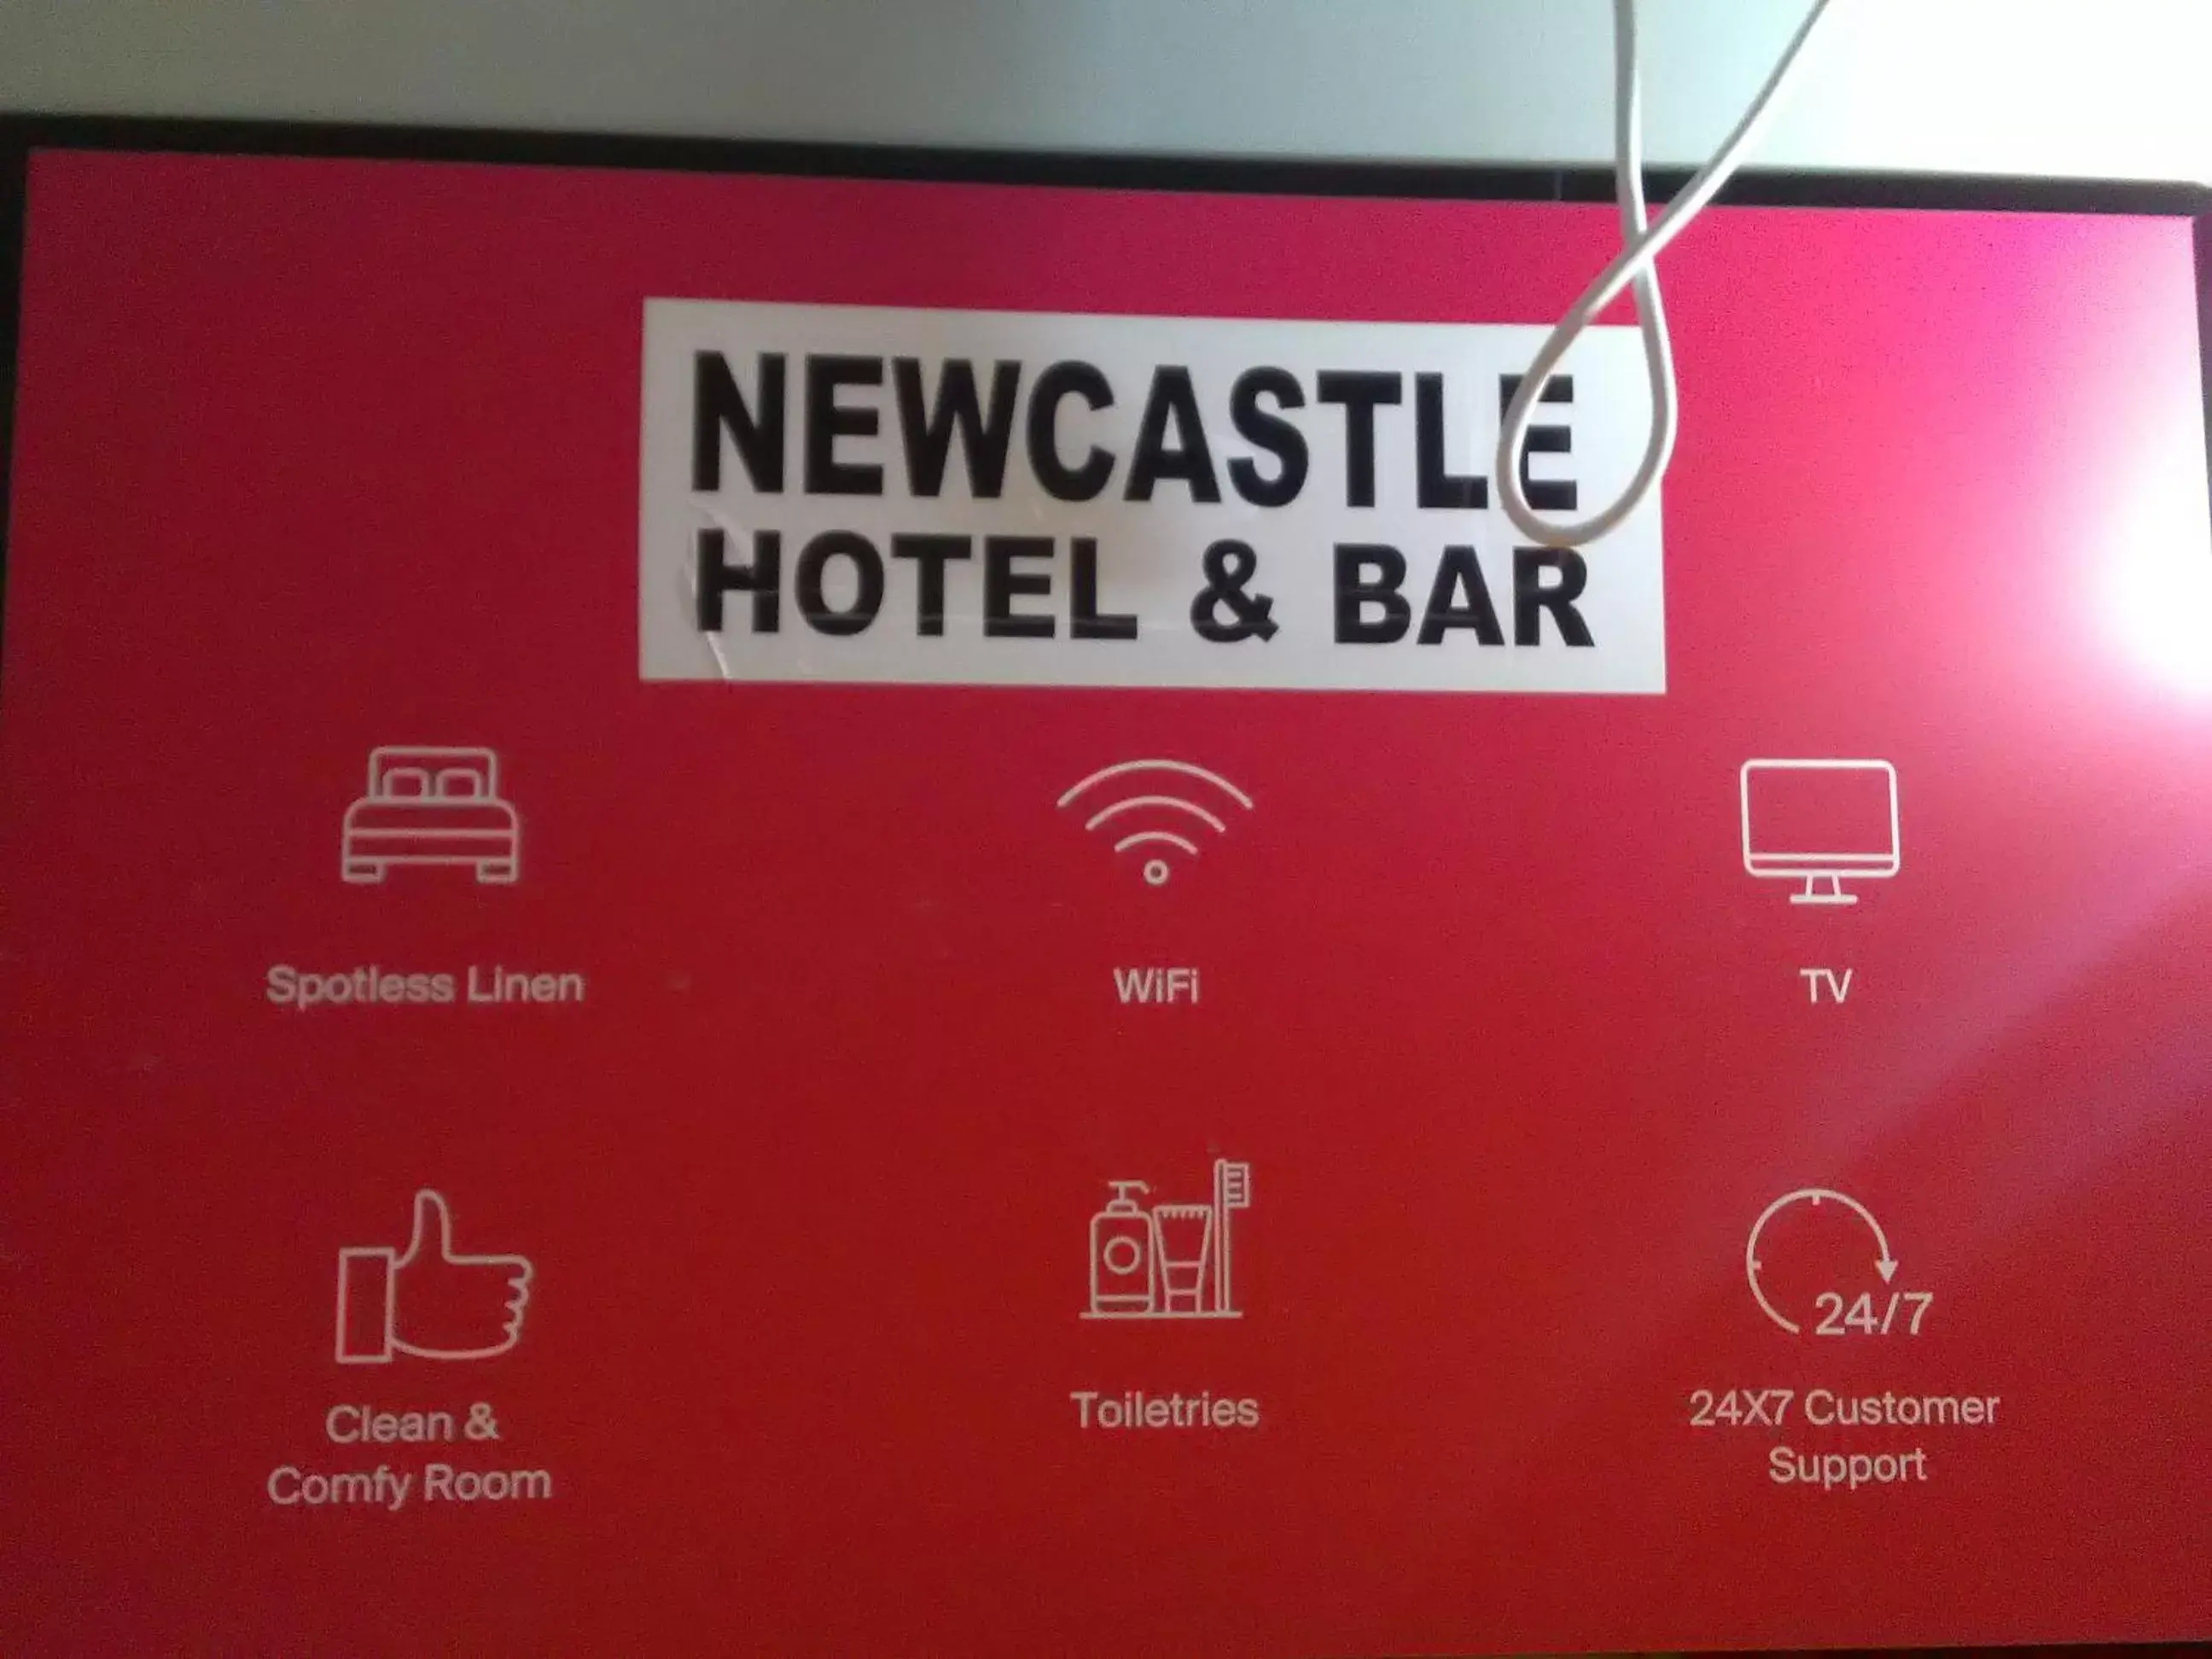 Property logo or sign in Newcastle West Hotel & Bar